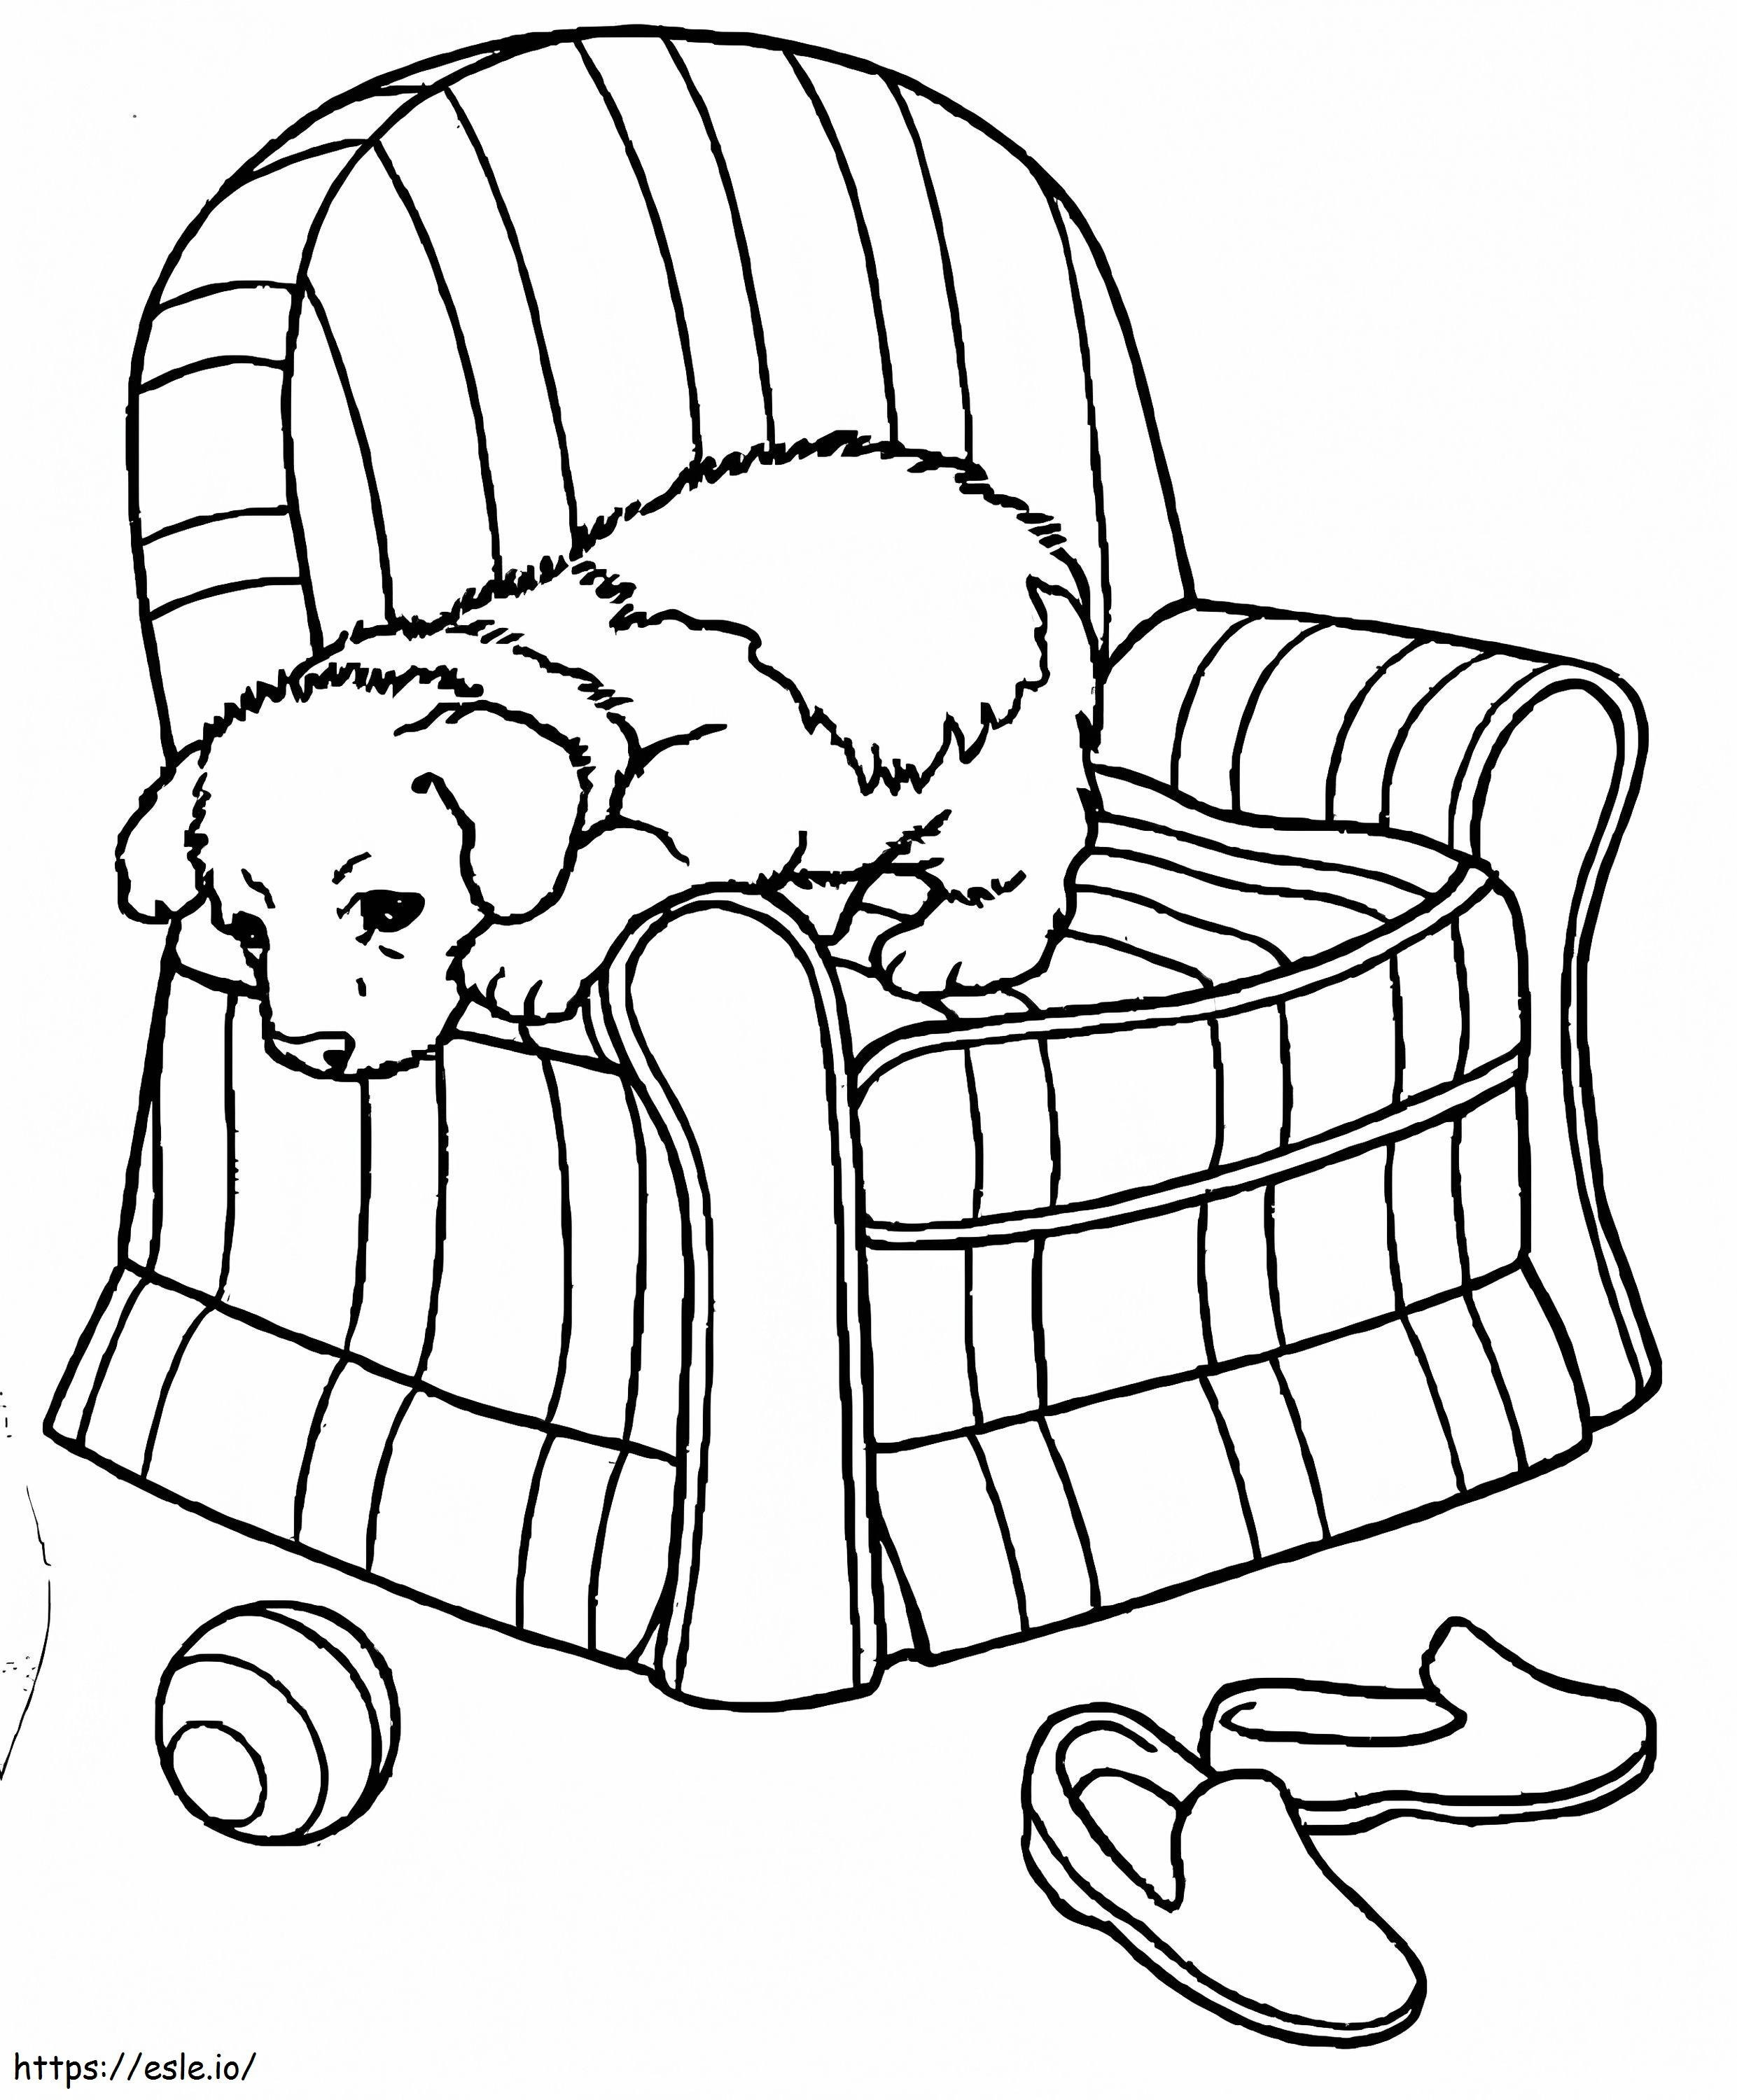 Puppy Free coloring page